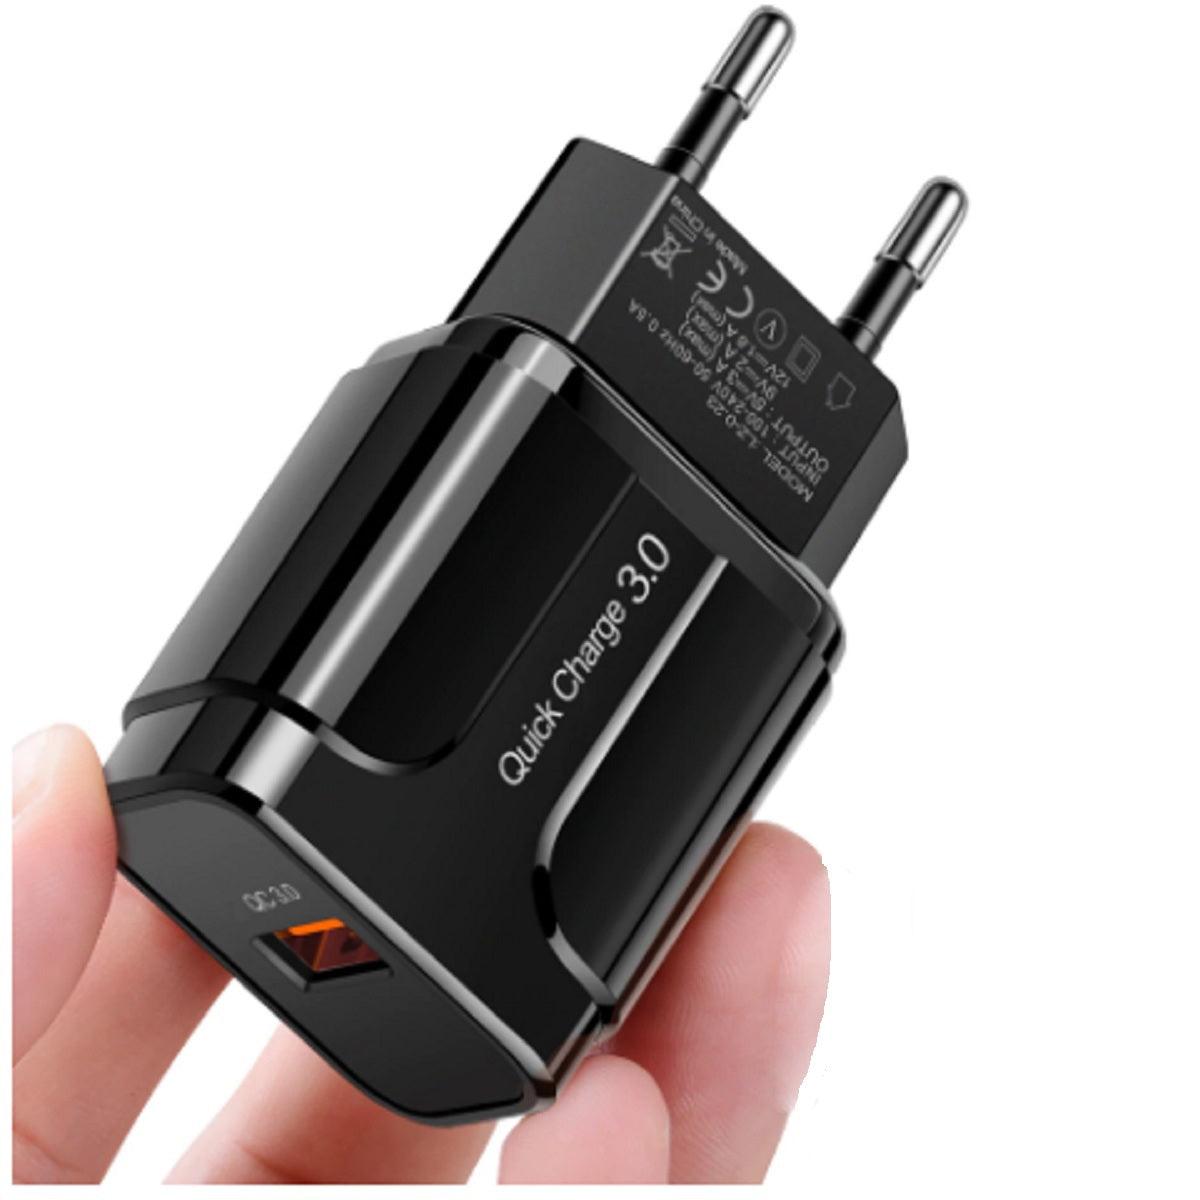 High Power Mobile Phone Fast Charging Adapter - Quick Charge 3.0 - dealskart.com.au